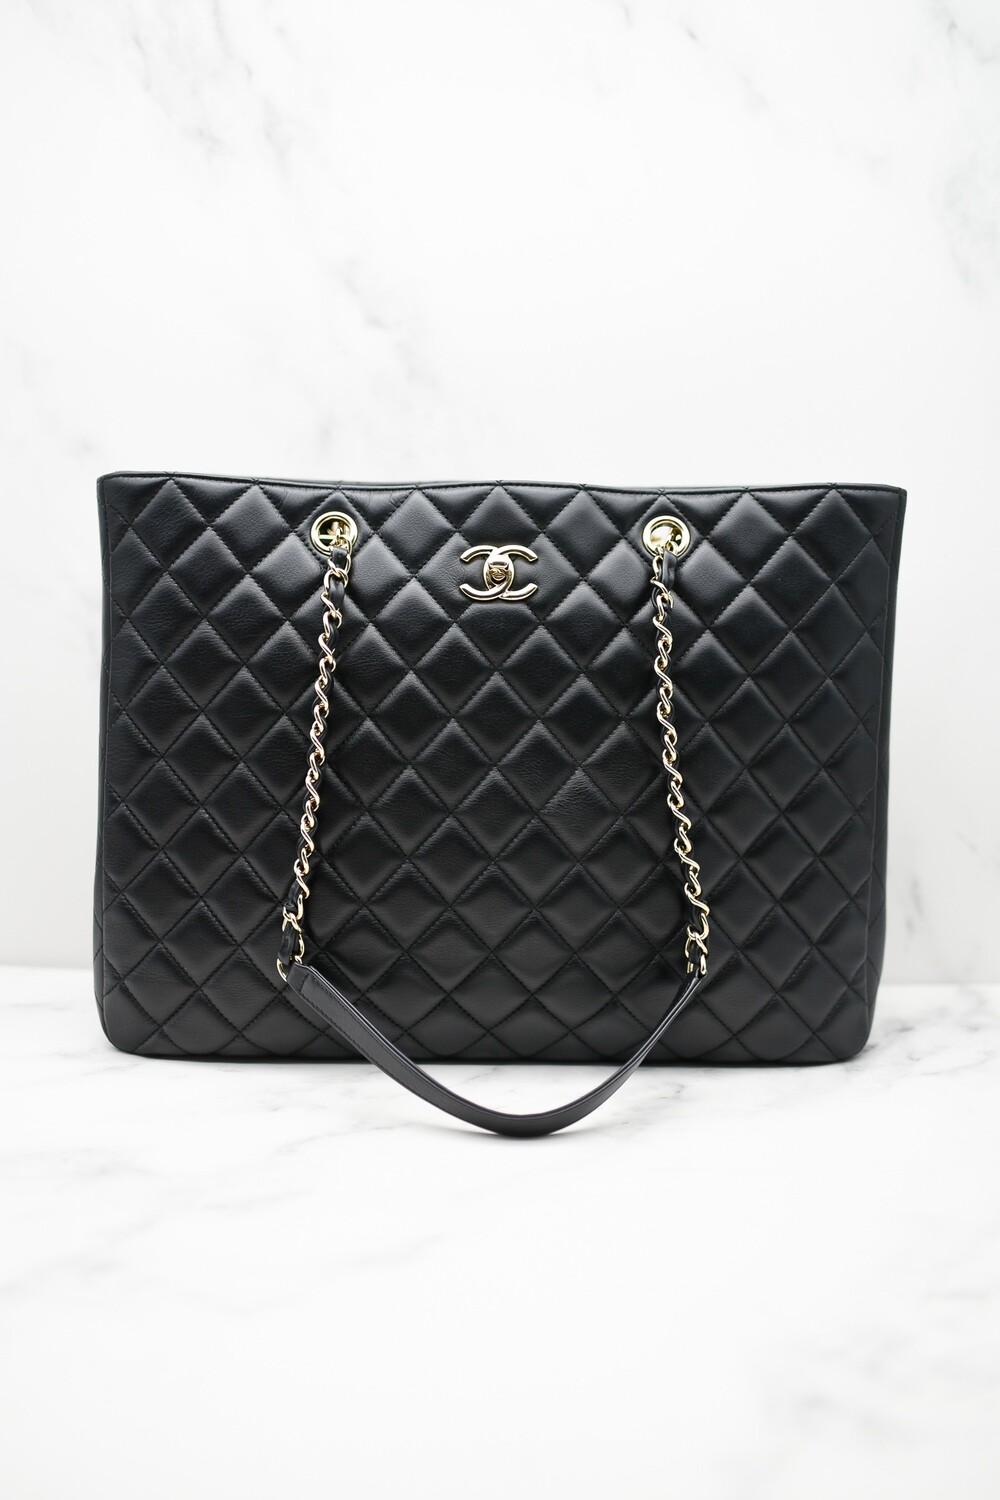 Chanel Timeless Tote, Black Lambskin with Gold Hardware, Preowned